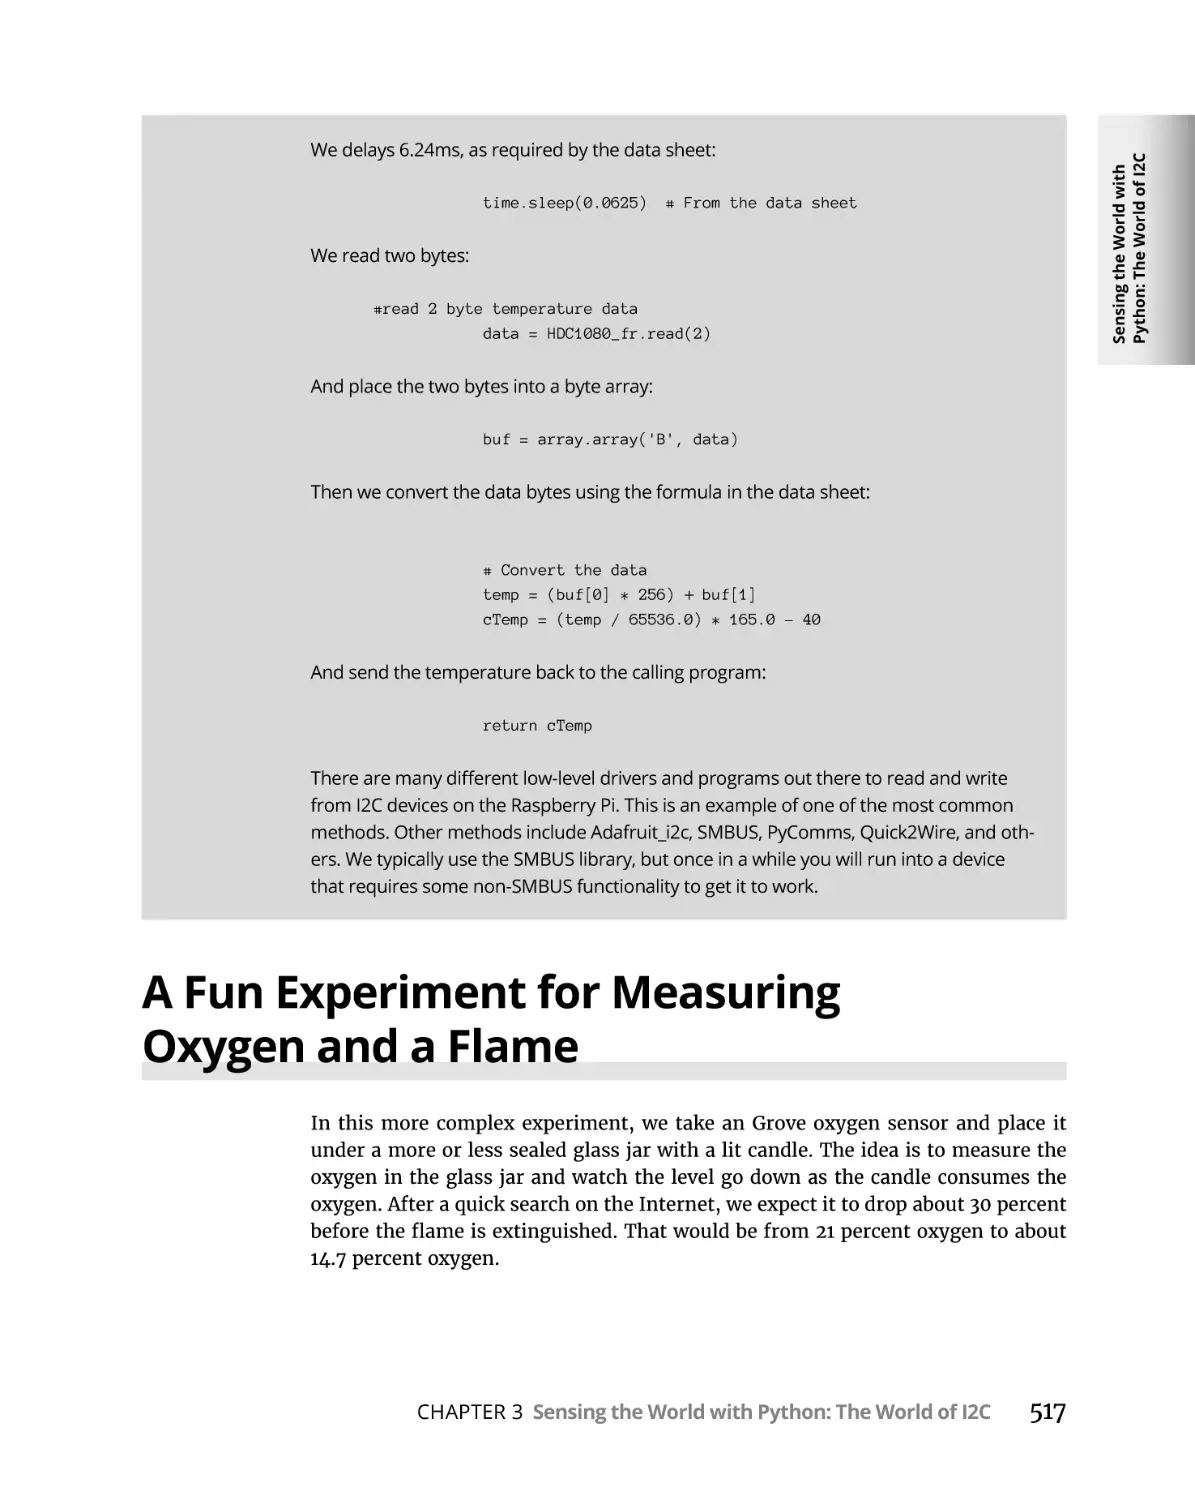 A Fun Experiment for Measuring Oxygen and a Flame